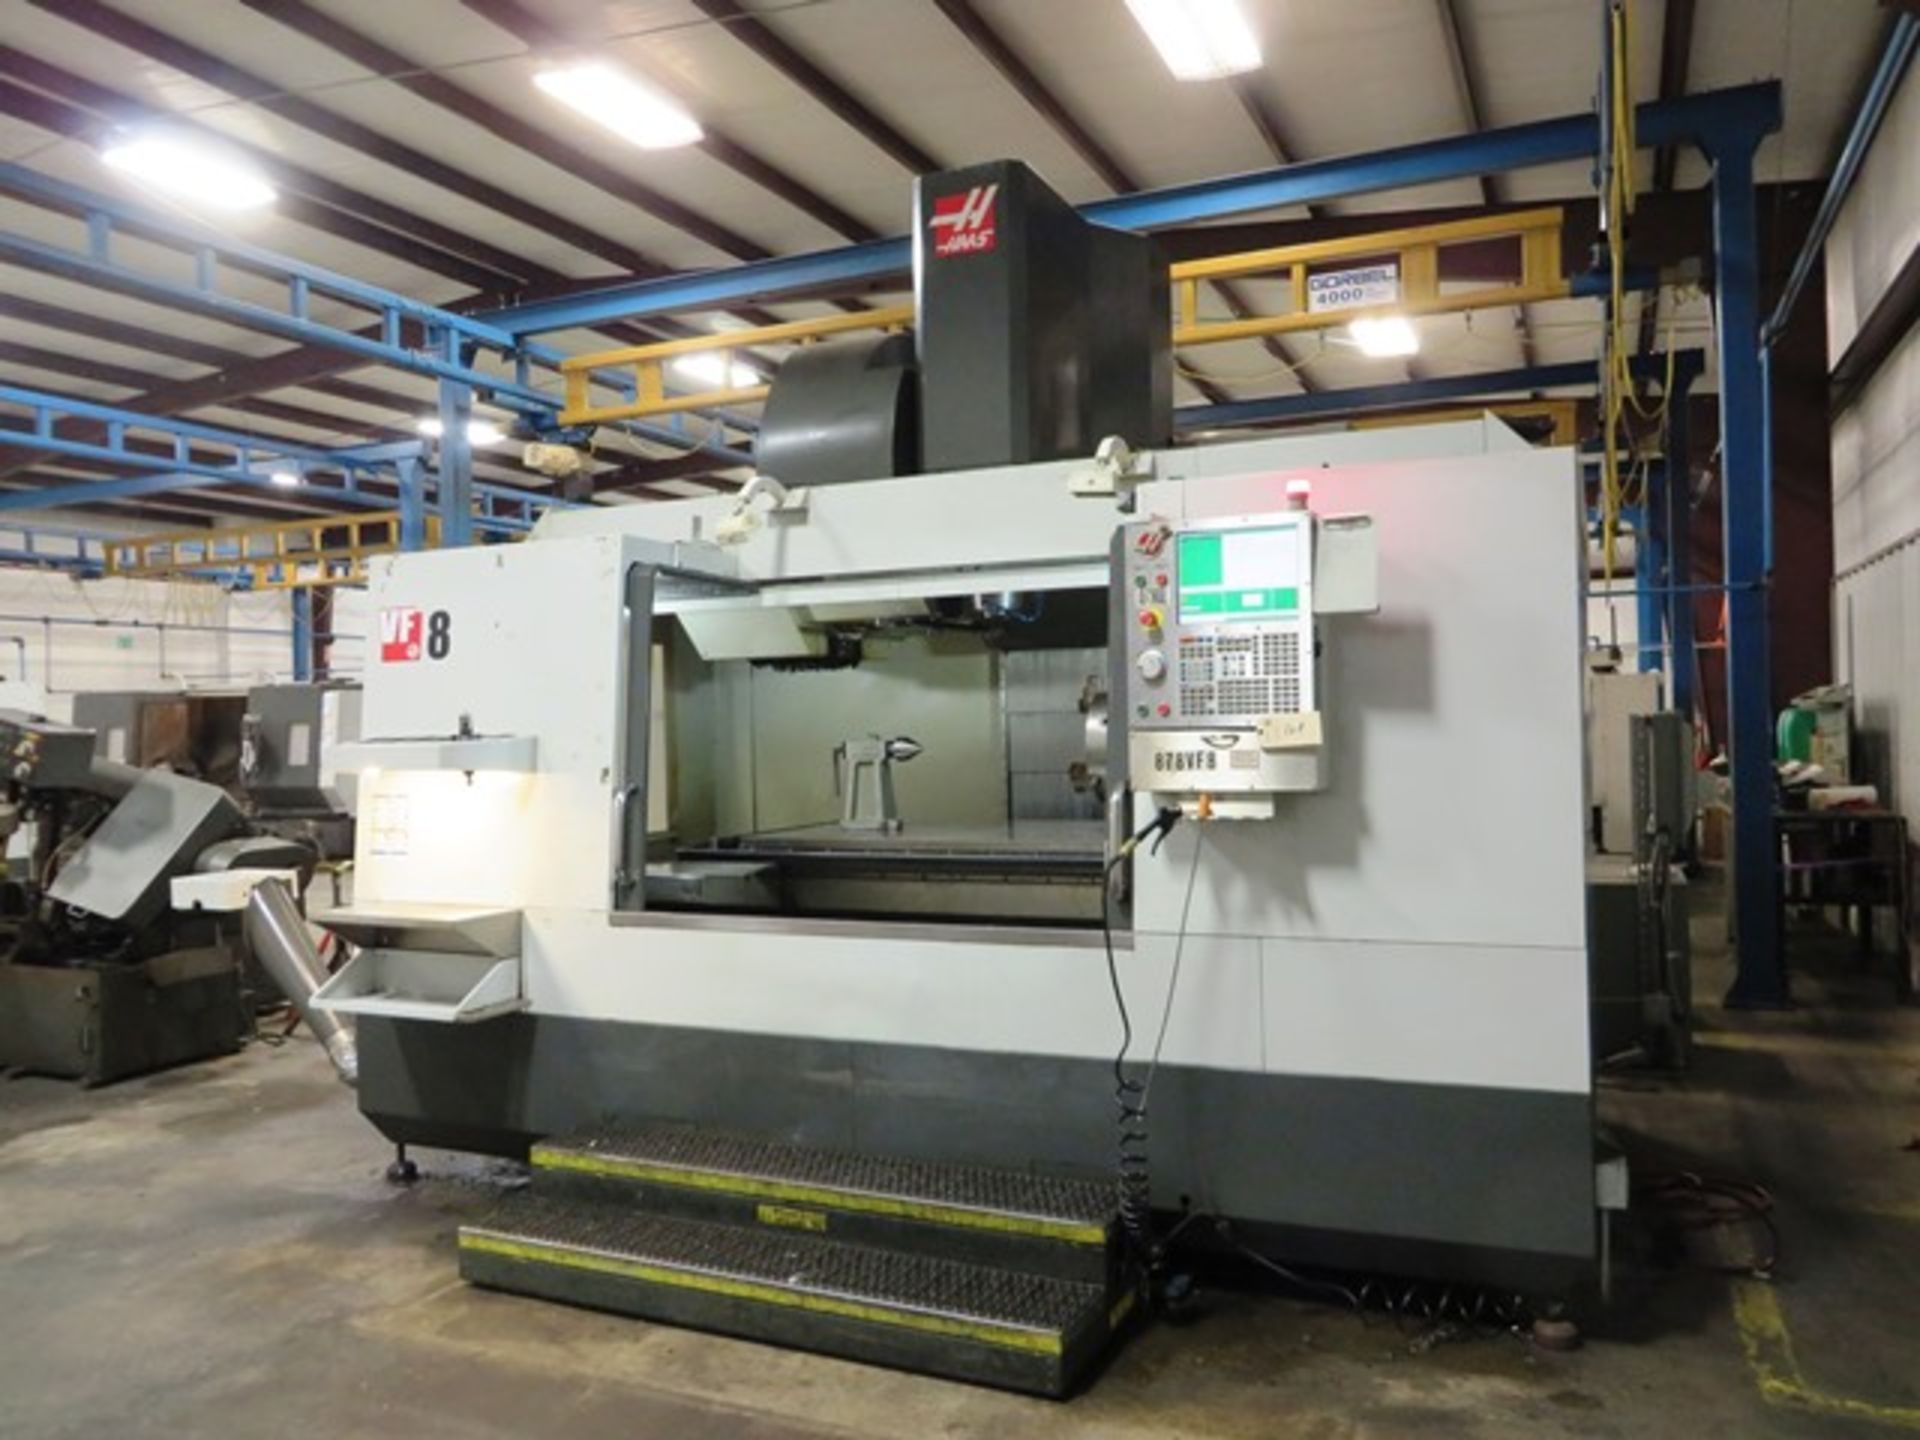 2012 Haas VF-8/50 4-Axis CNC Vertical Machining Center - Image 3 of 7